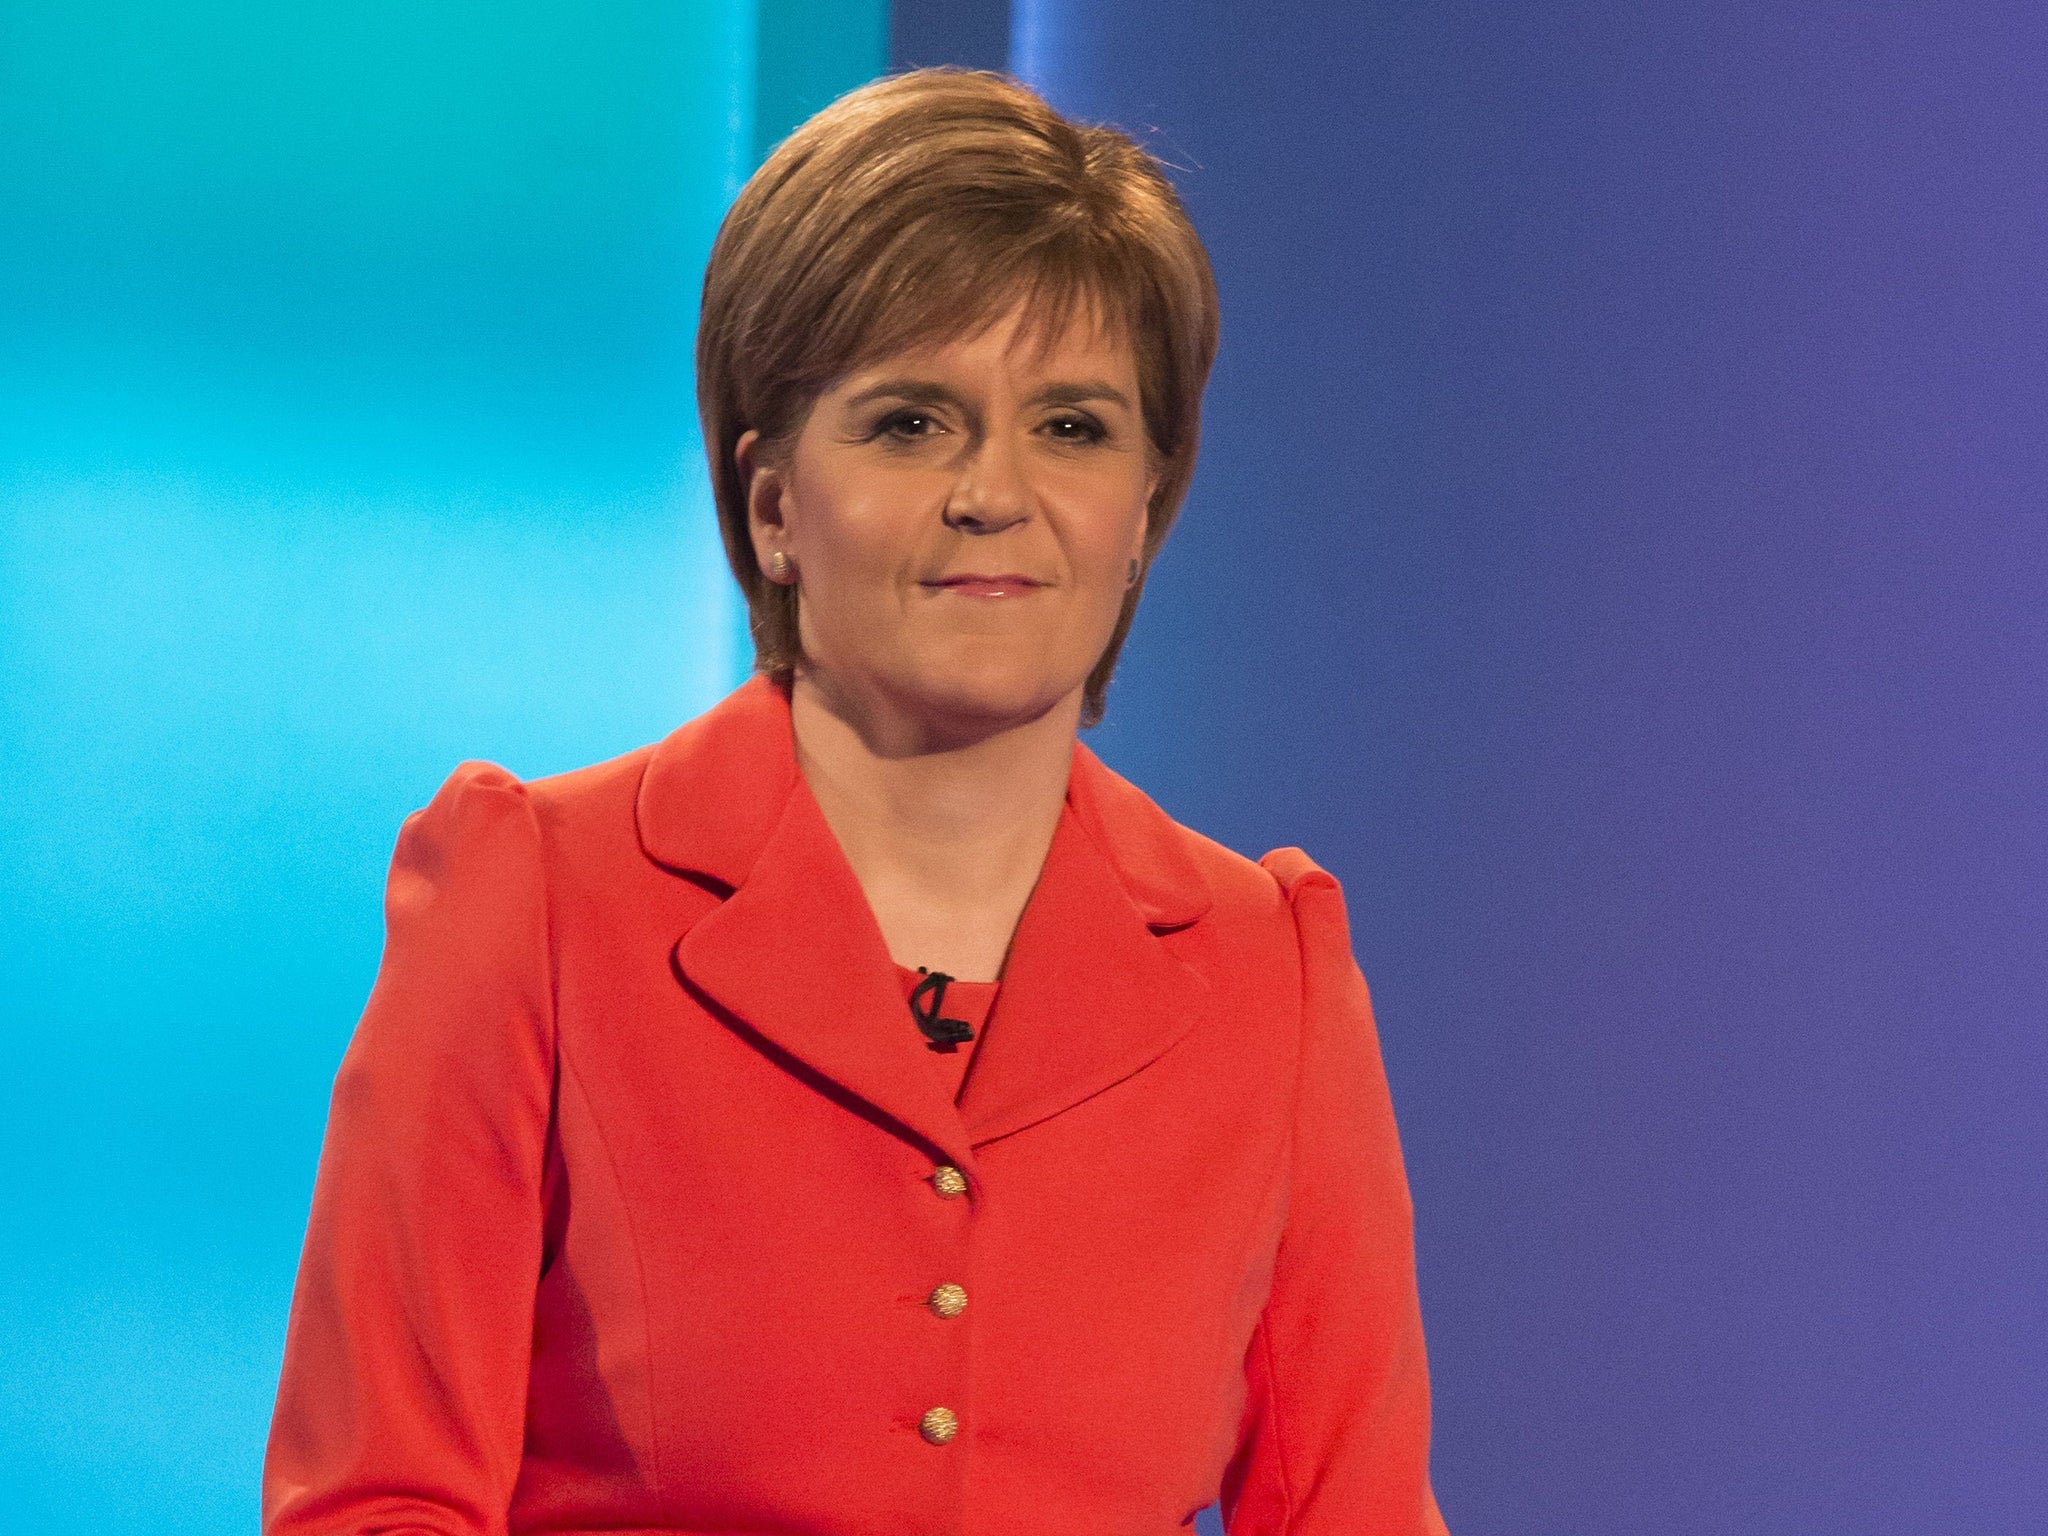 Nicola Sturgeon says the PM is acting like a "petulant schoolchild threatening to leave".